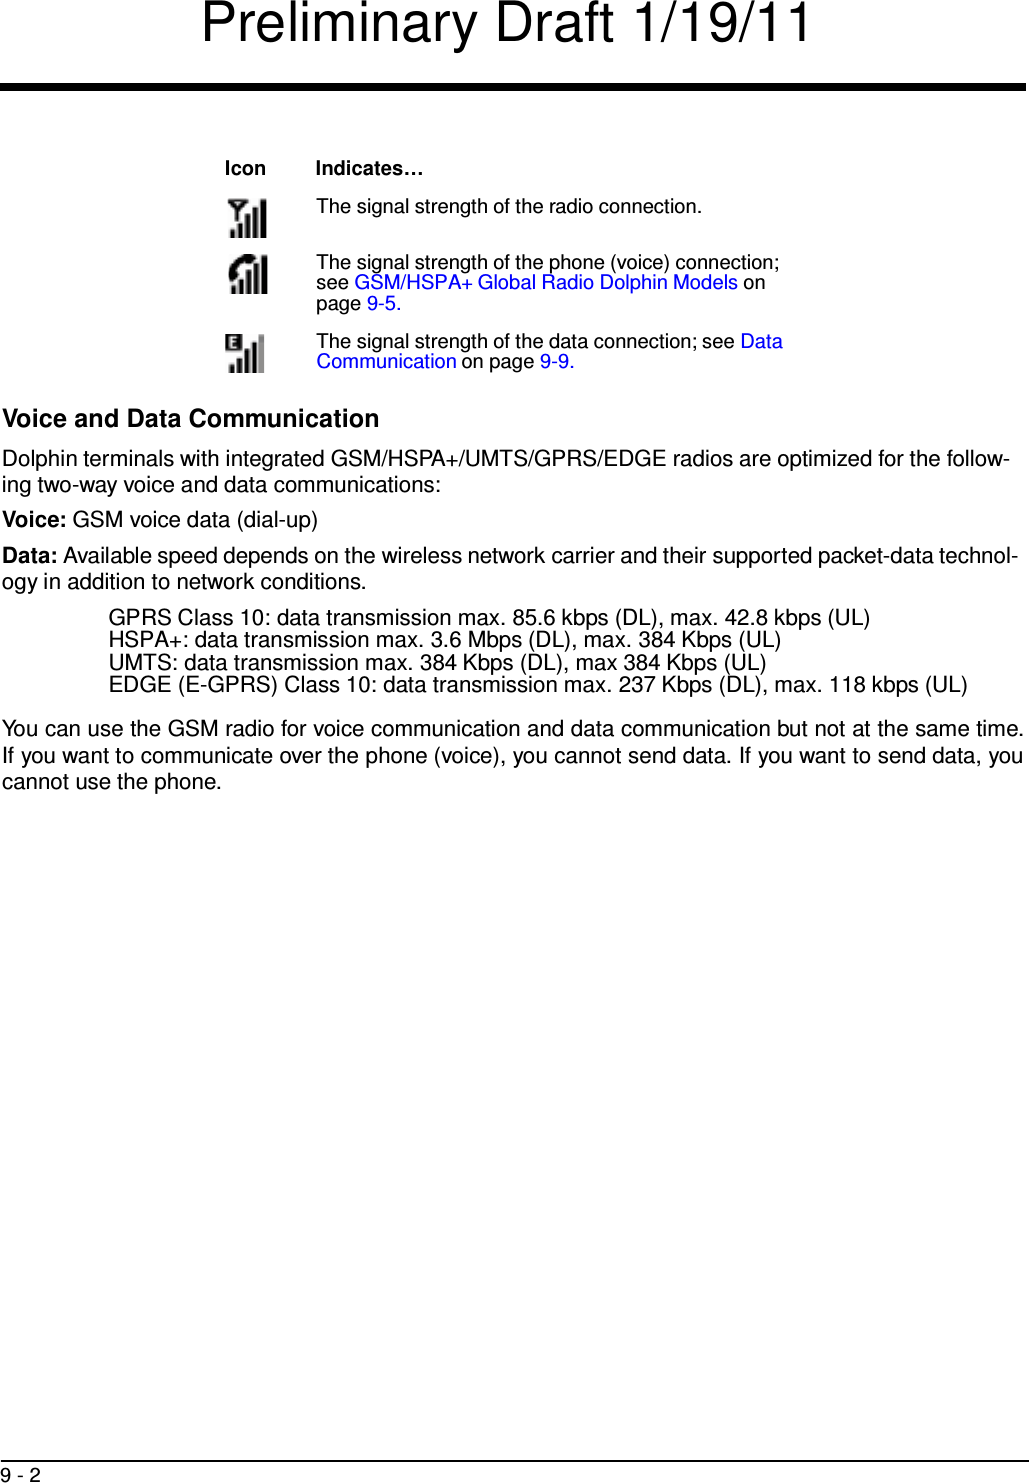 Preliminary Draft 1/19/11 9 - 2      Icon  Indicates…  The signal strength of the radio connection.   The signal strength of the phone (voice) connection; see GSM/HSPA+ Global Radio Dolphin Models on page 9-5.  The signal strength of the data connection; see Data Communication on page 9-9.   Voice and Data Communication  Dolphin terminals with integrated GSM/HSPA+/UMTS/GPRS/EDGE radios are optimized for the follow- ing two-way voice and data communications: Voice: GSM voice data (dial-up) Data: Available speed depends on the wireless network carrier and their supported packet-data technol- ogy in addition to network conditions.  GPRS Class 10: data transmission max. 85.6 kbps (DL), max. 42.8 kbps (UL) HSPA+: data transmission max. 3.6 Mbps (DL), max. 384 Kbps (UL) UMTS: data transmission max. 384 Kbps (DL), max 384 Kbps (UL) EDGE (E-GPRS) Class 10: data transmission max. 237 Kbps (DL), max. 118 kbps (UL)  You can use the GSM radio for voice communication and data communication but not at the same time. If you want to communicate over the phone (voice), you cannot send data. If you want to send data, you cannot use the phone. 